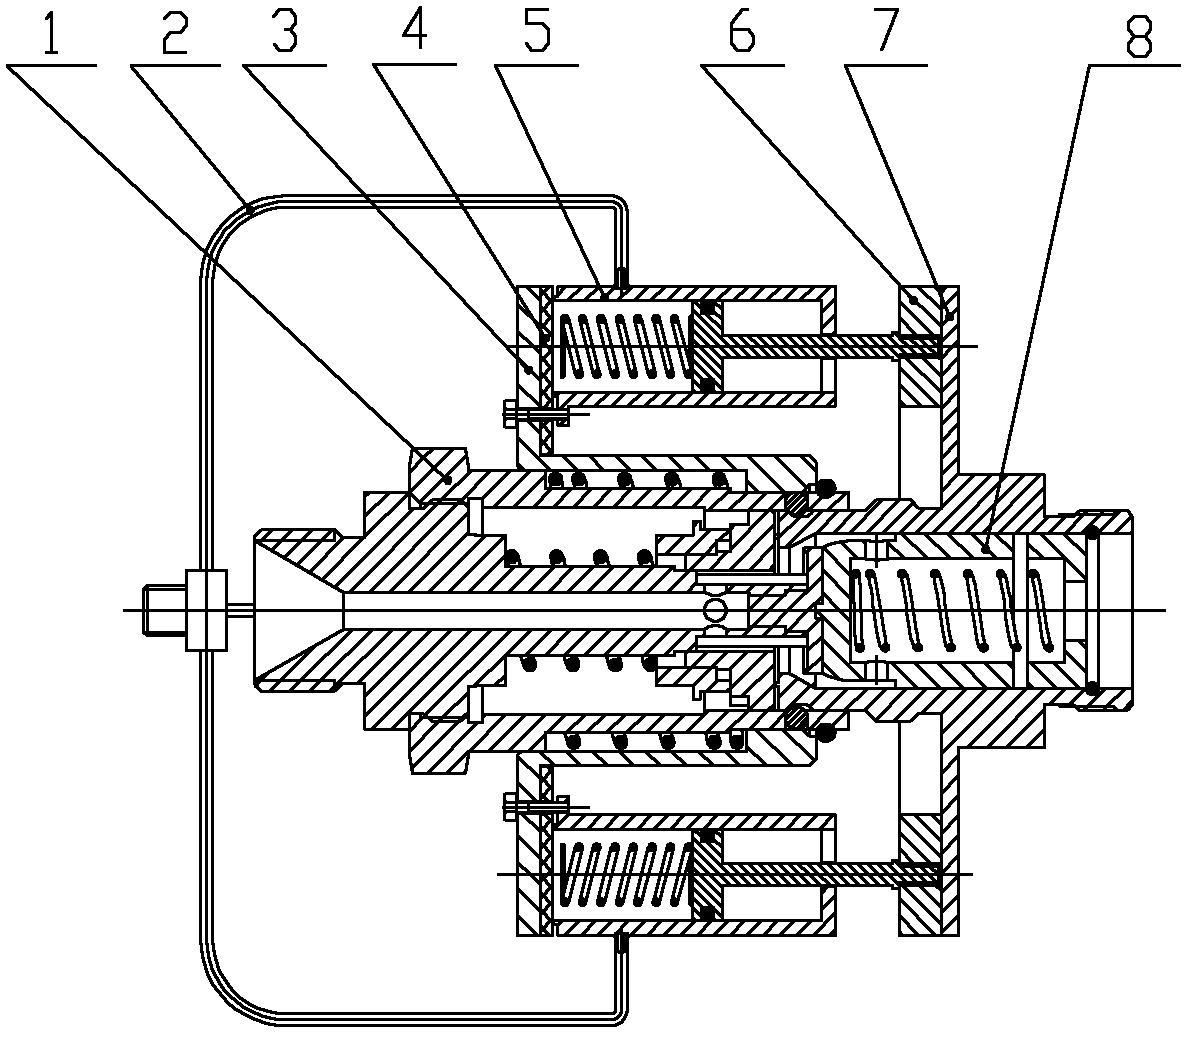 Self-sealing filling valve capable of automatically unlocking at low temperature